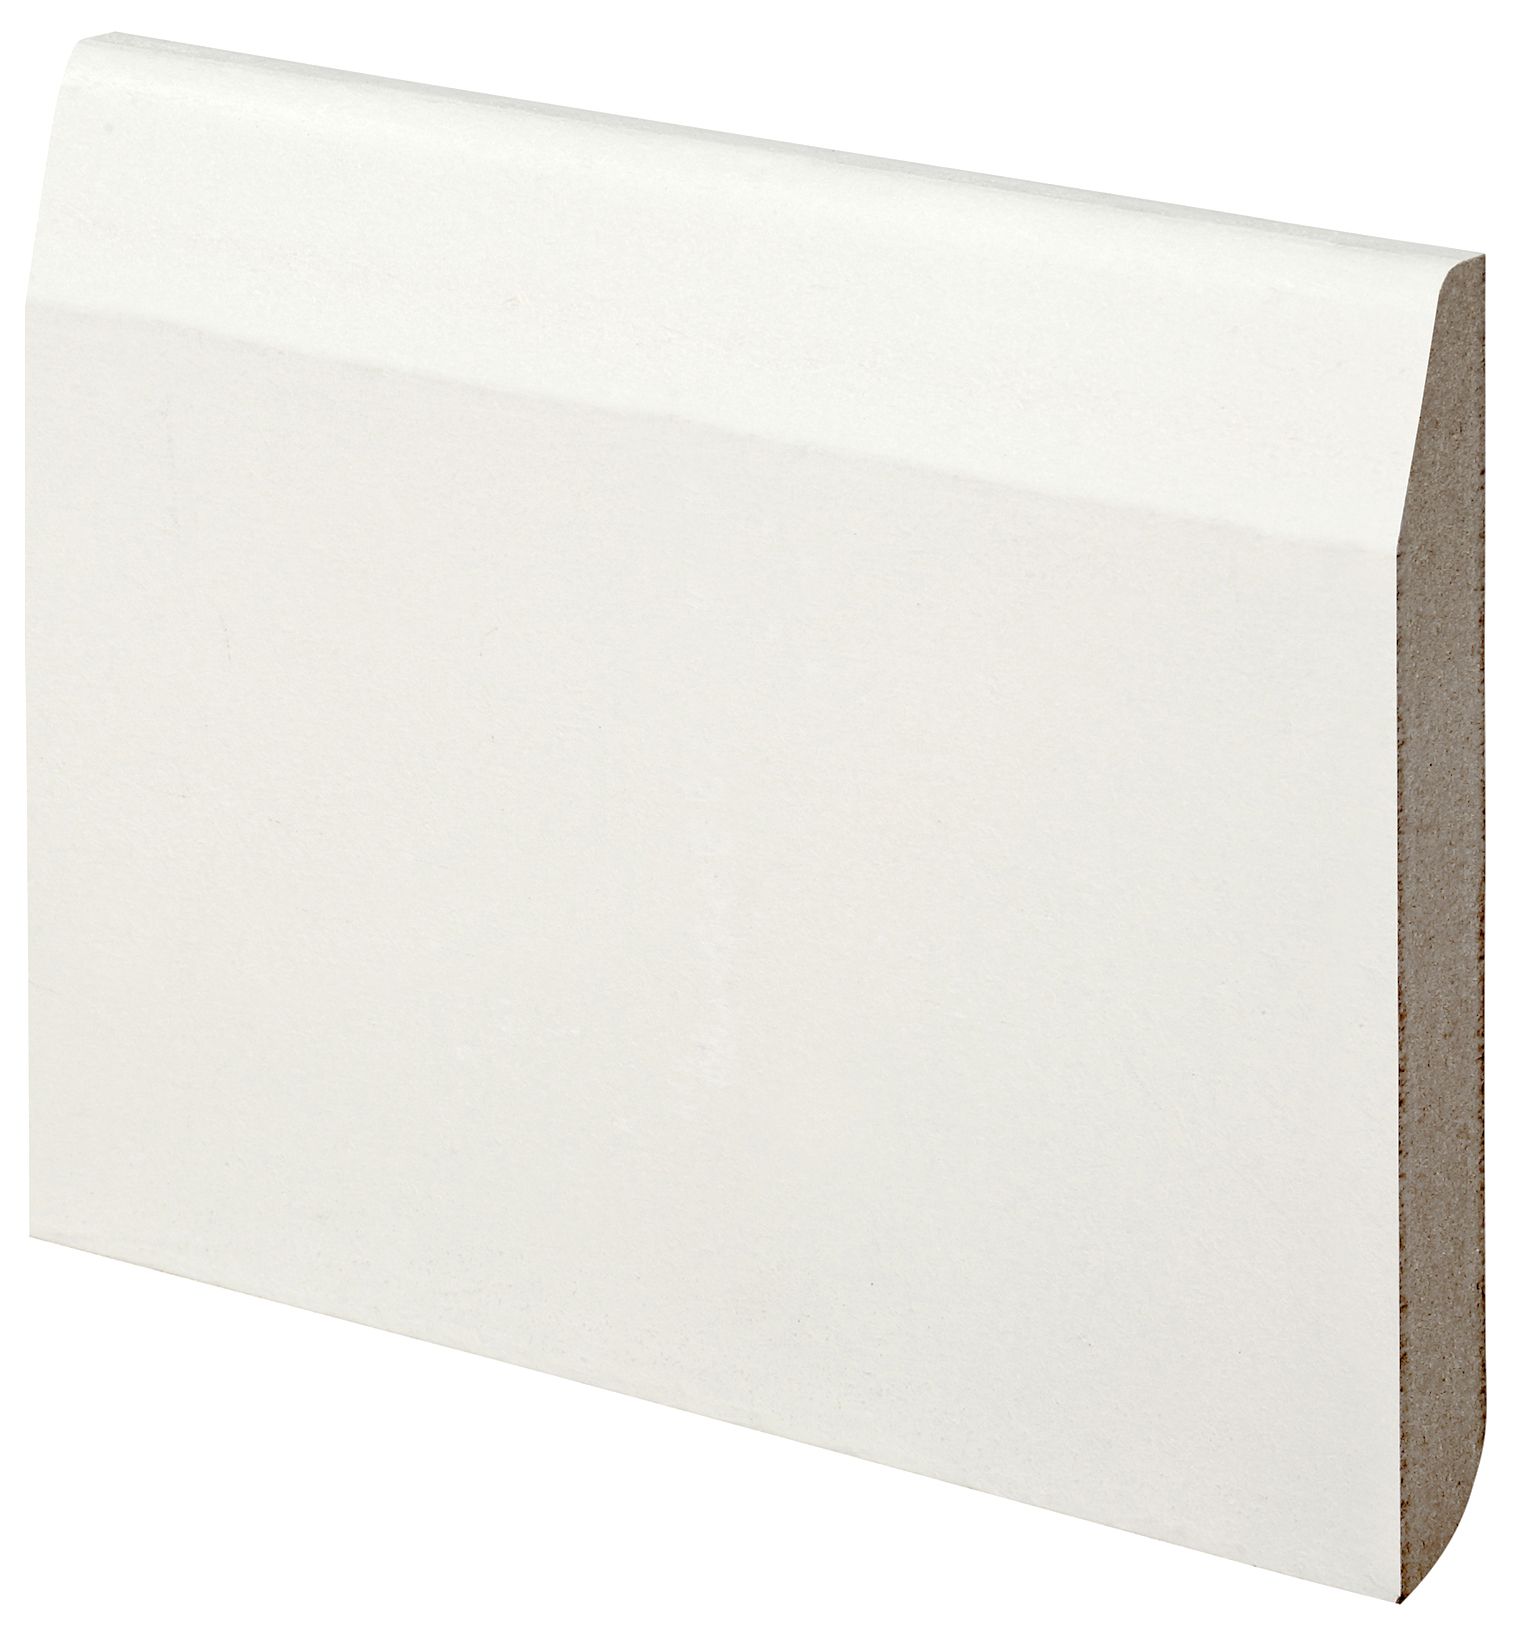 Image of Wickes Dual Purpose Chamfered/Bullnose Primed MDF Skirting - 18 x 119 x 3660mm